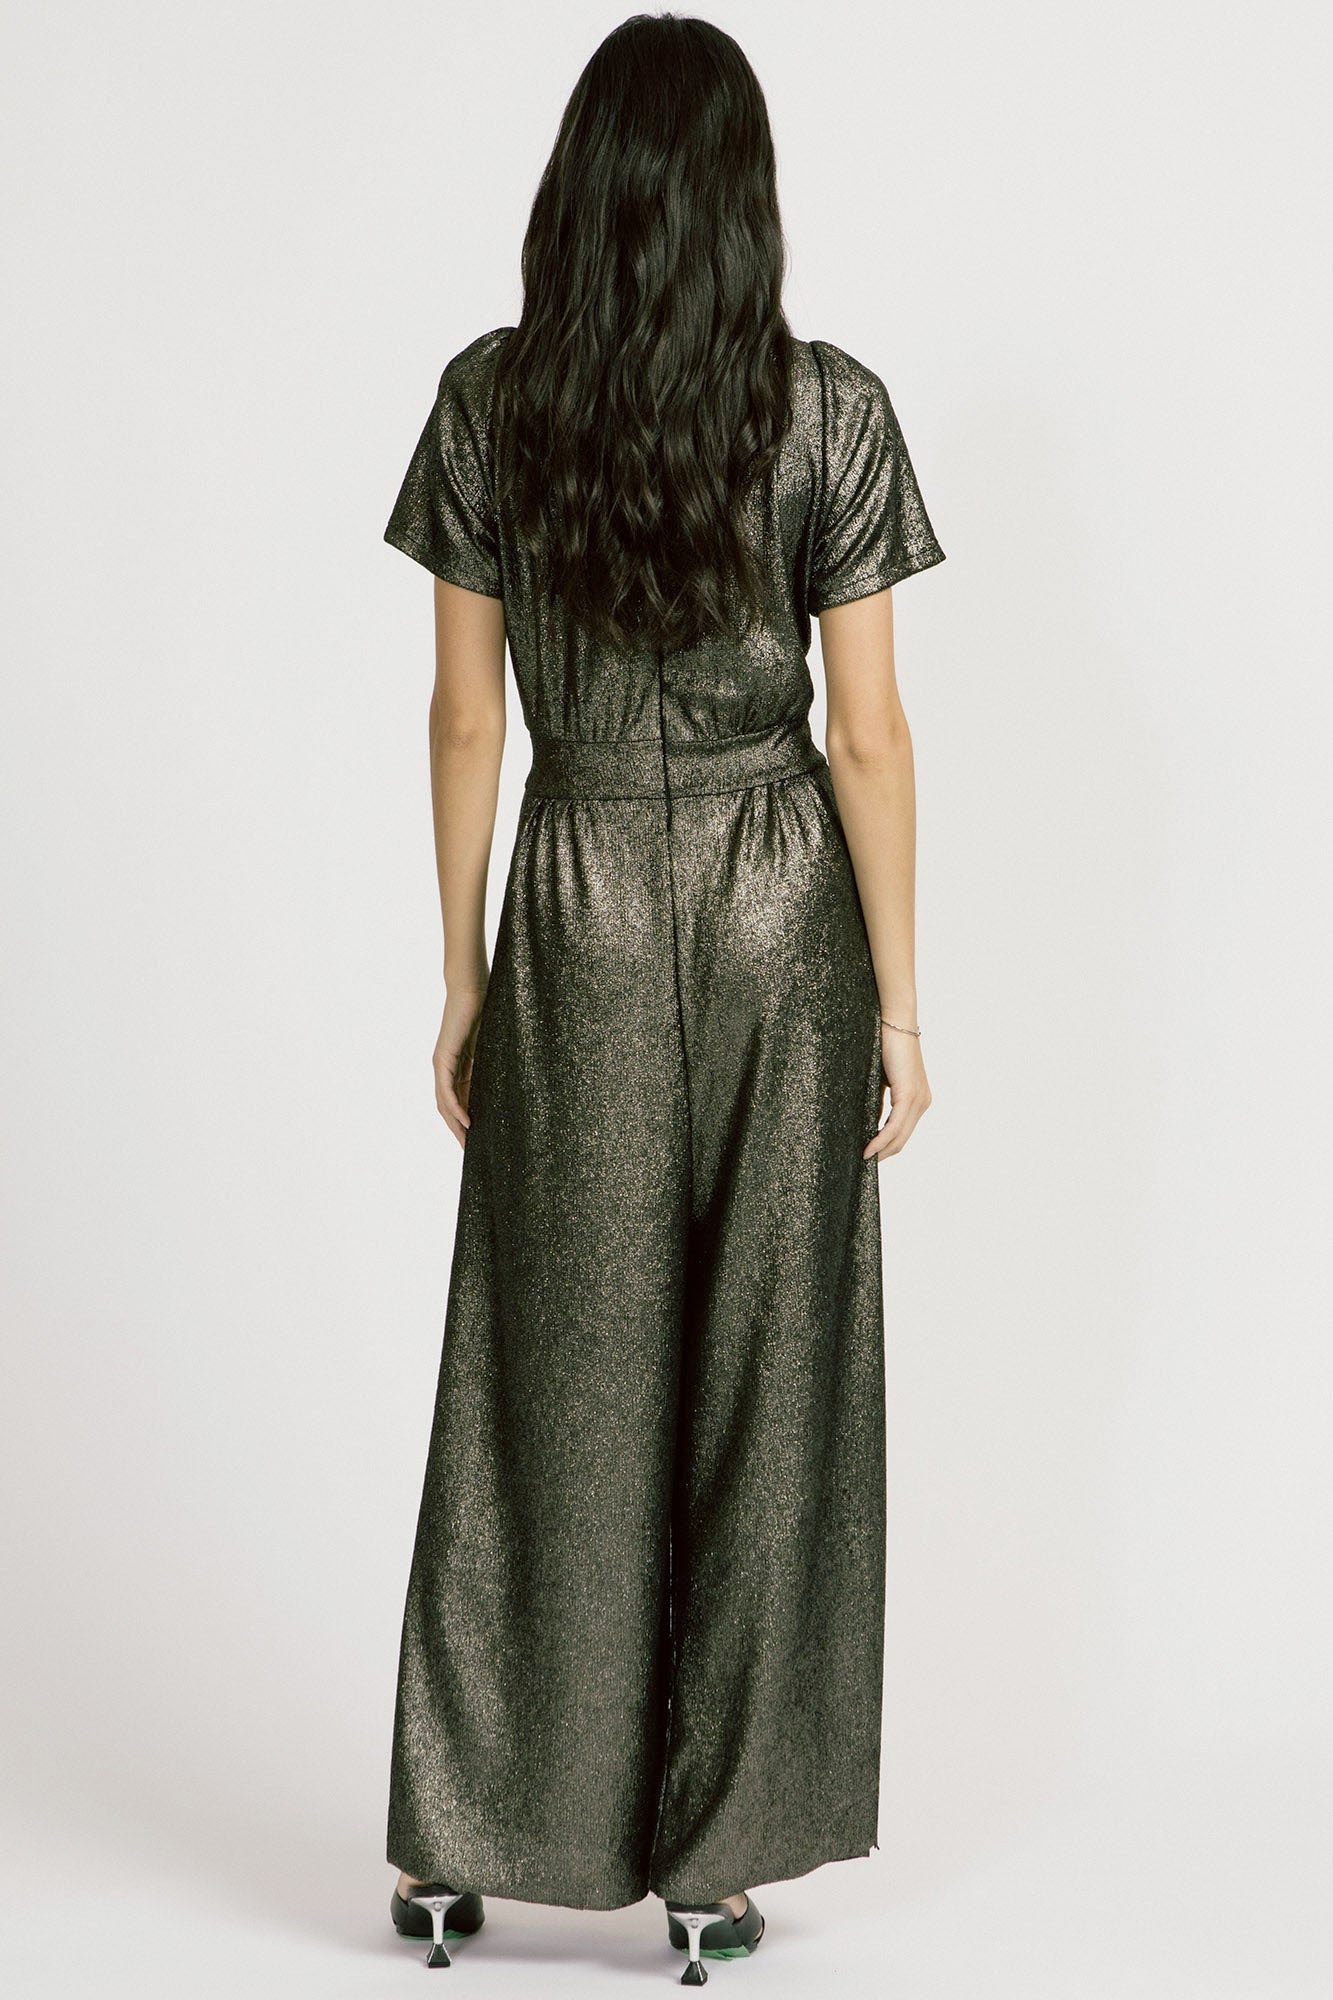 Spirited Jumpsuit by Allison Wonderland, Metallic, back view, short sleeves, deep V-neck, gathers under bust, fitted waistband, wide legs, front pleats, pockets, sizes 2-12, made in Vancouver